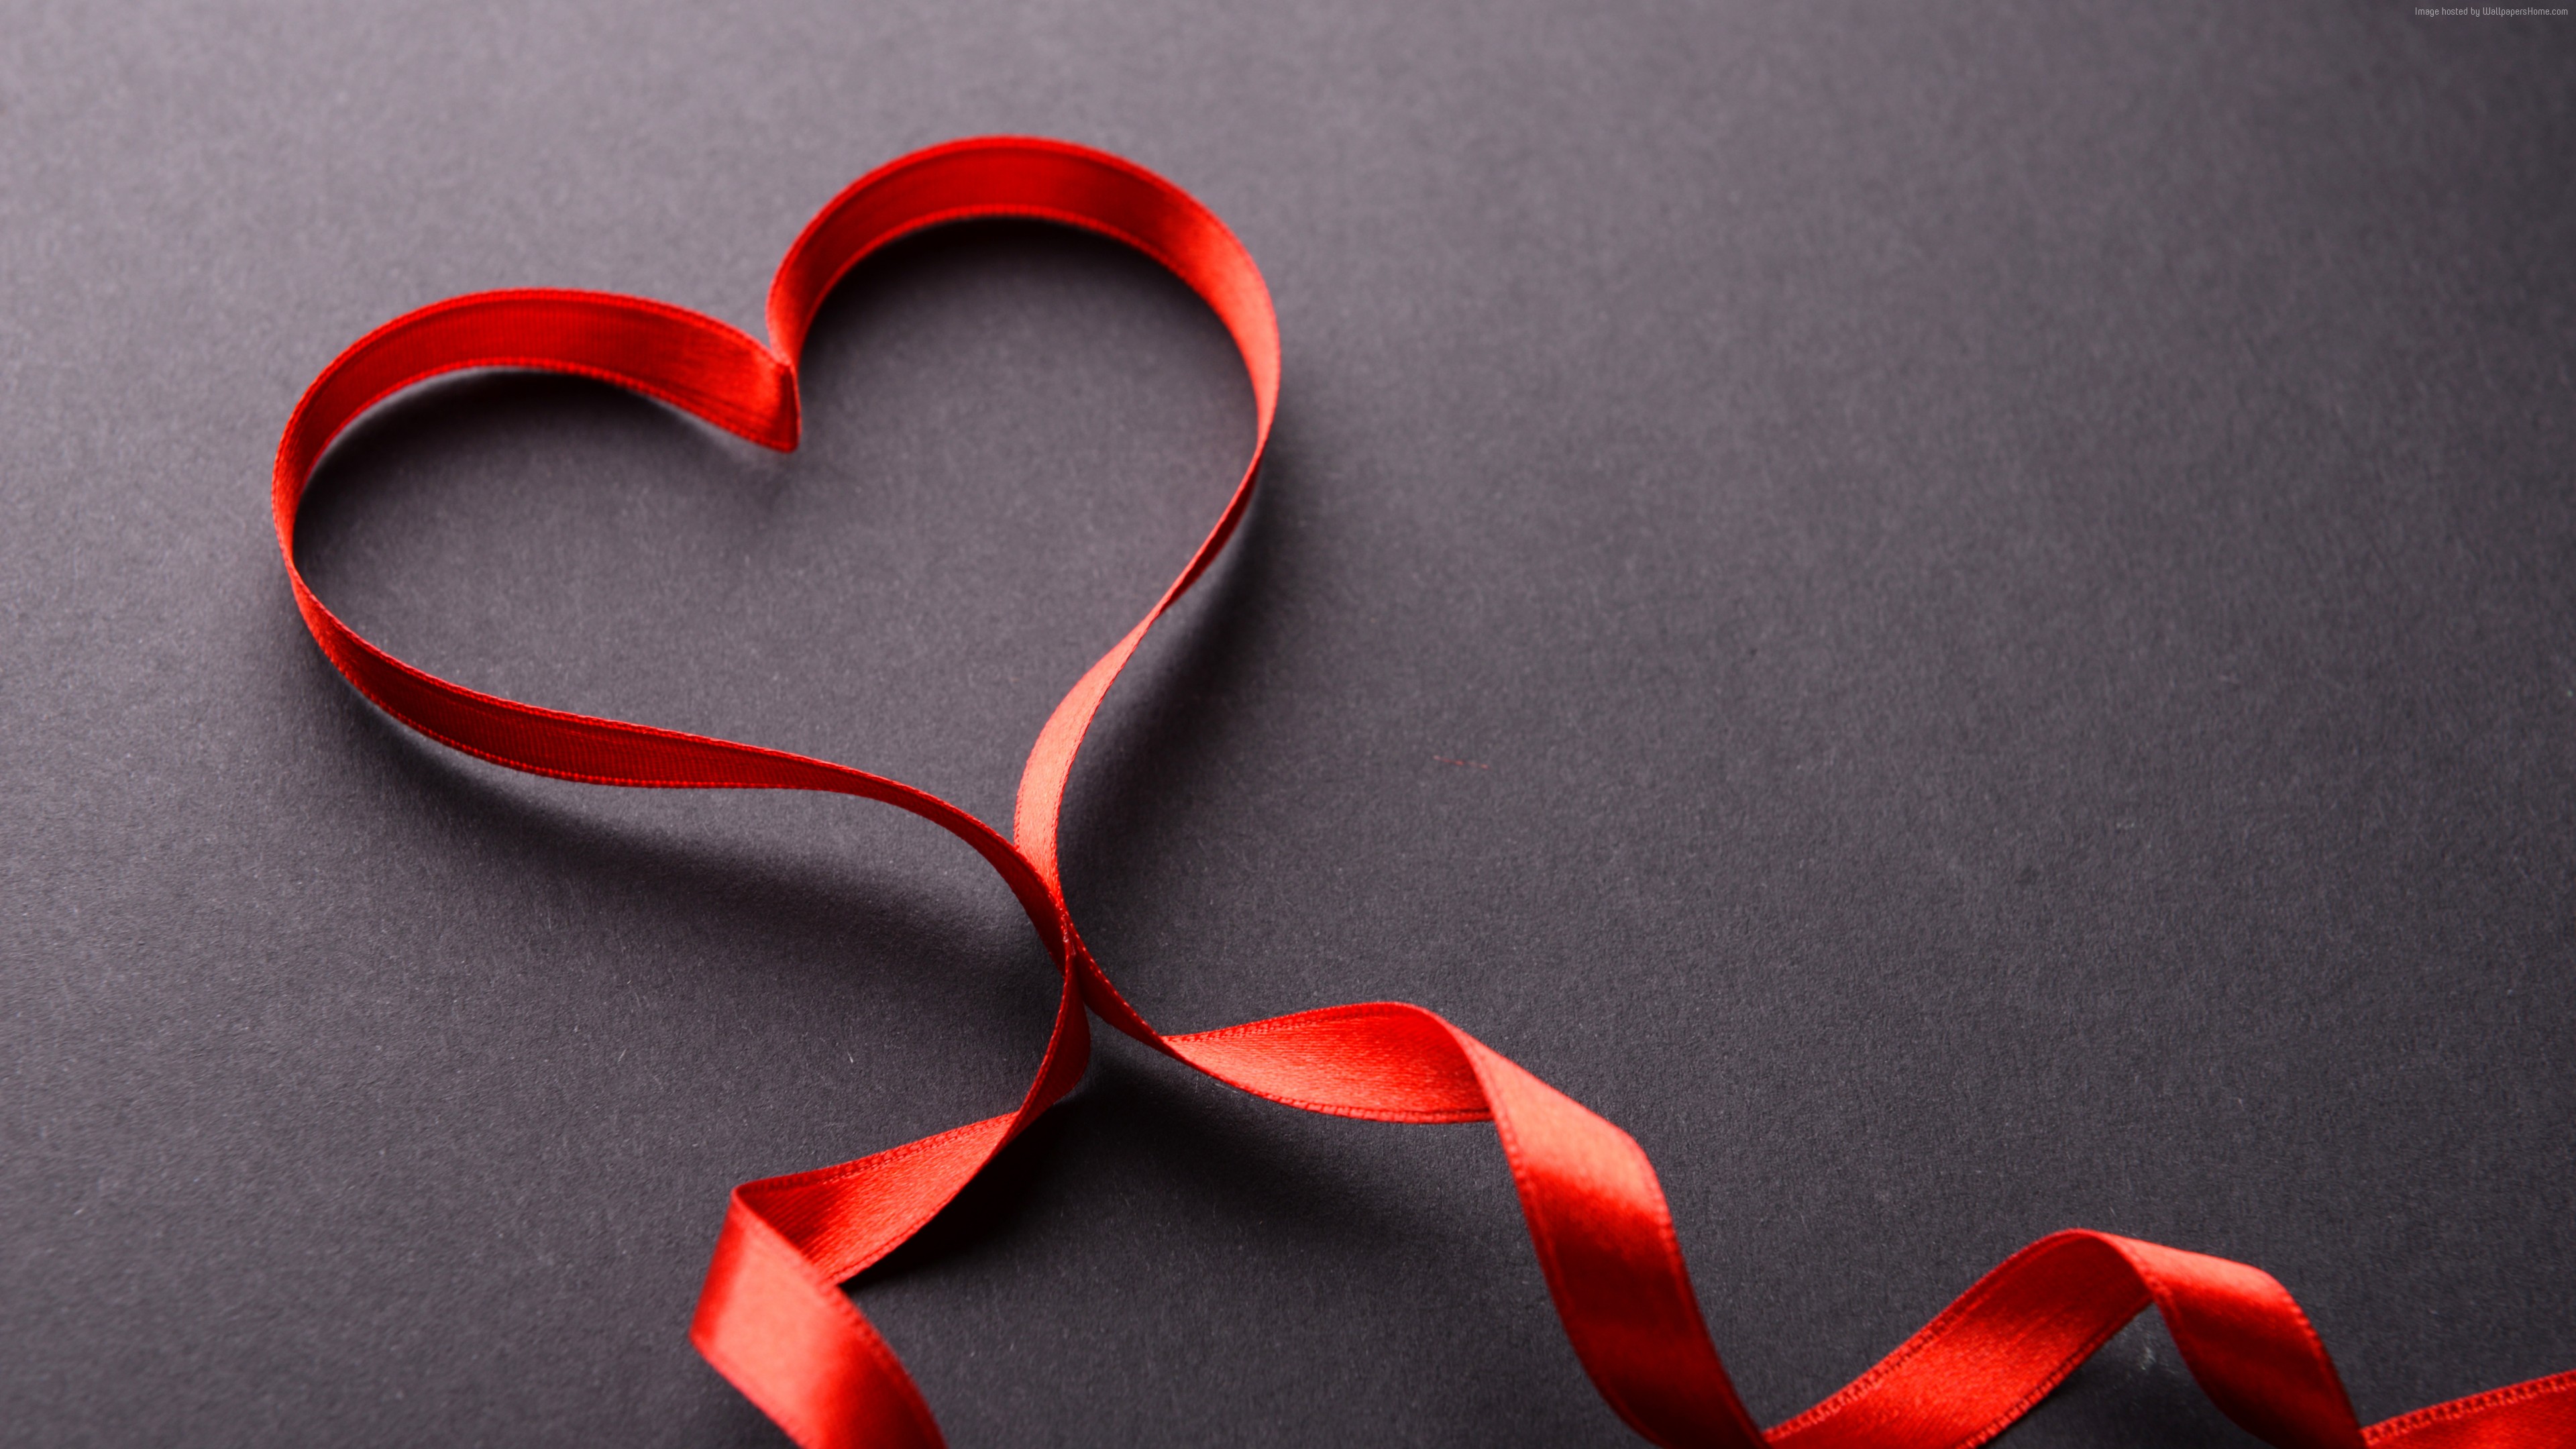 Stock Images love image, heart, ribbon, 5k, Stock Images